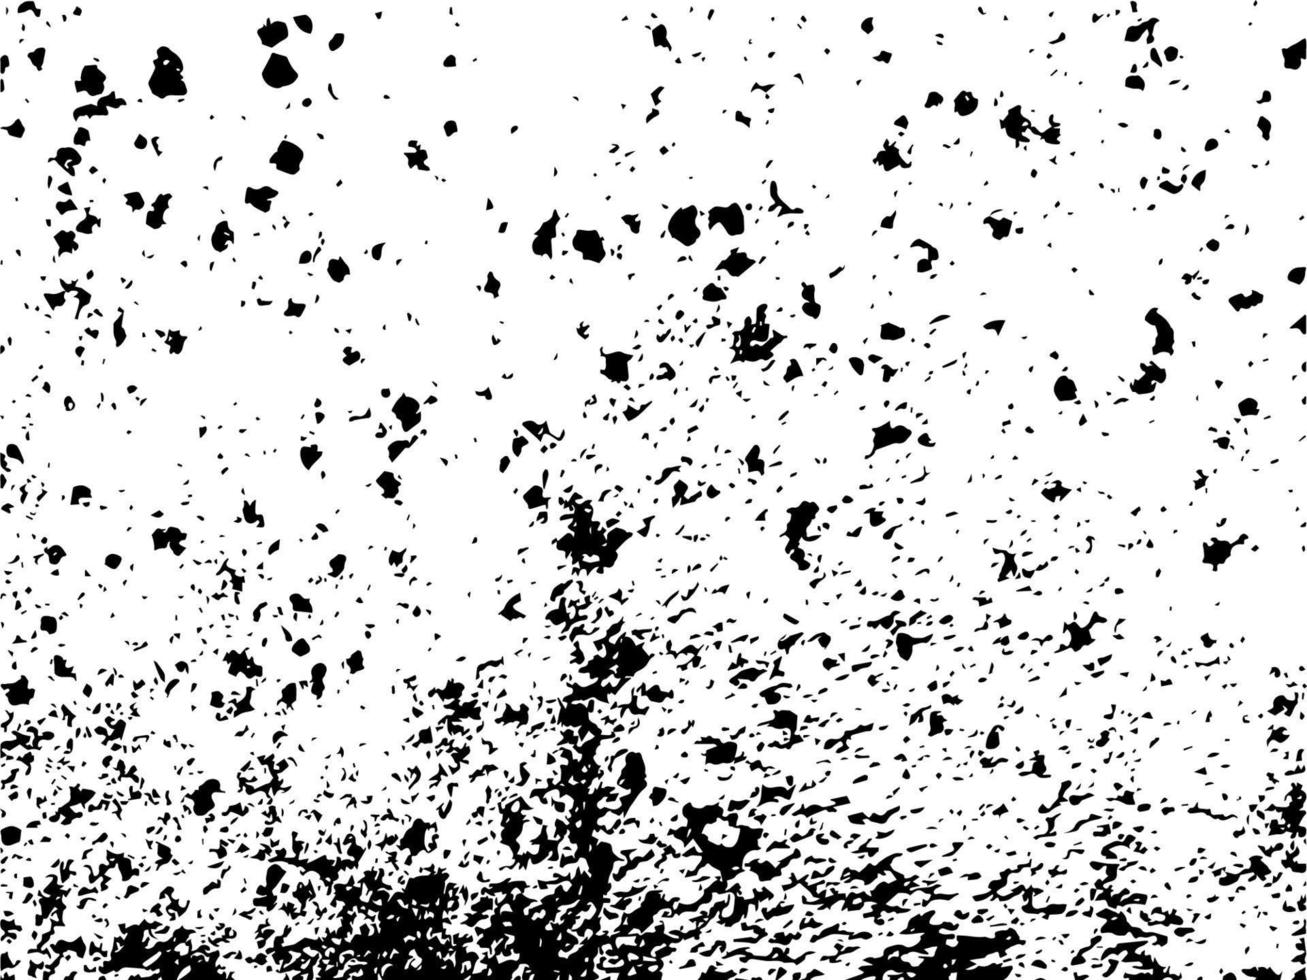 Grunge background black and white. Texture of chips, vector